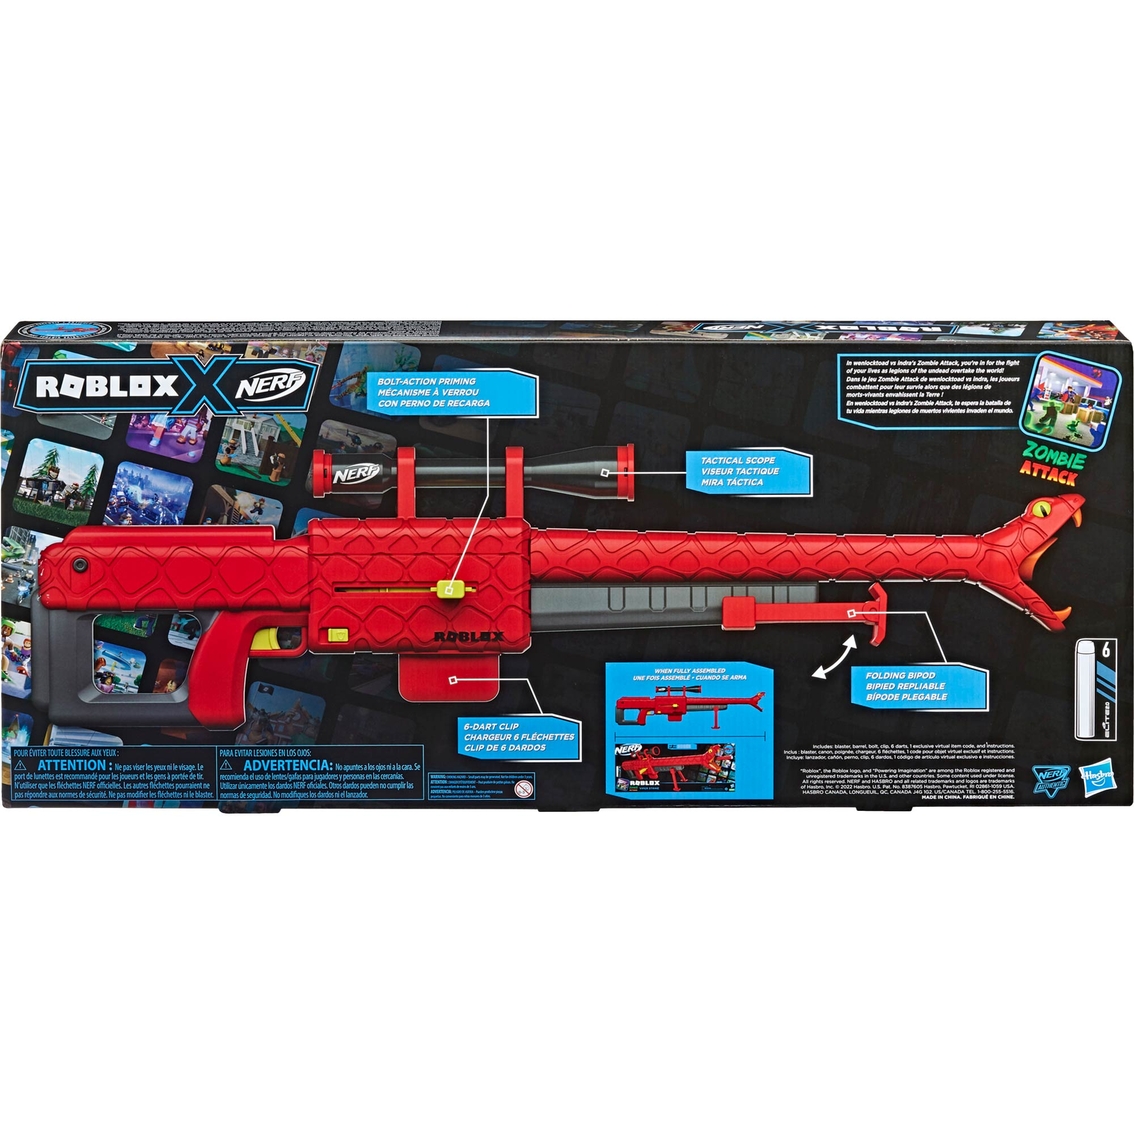 Roblox nerf gun • Compare (10 products) see prices »